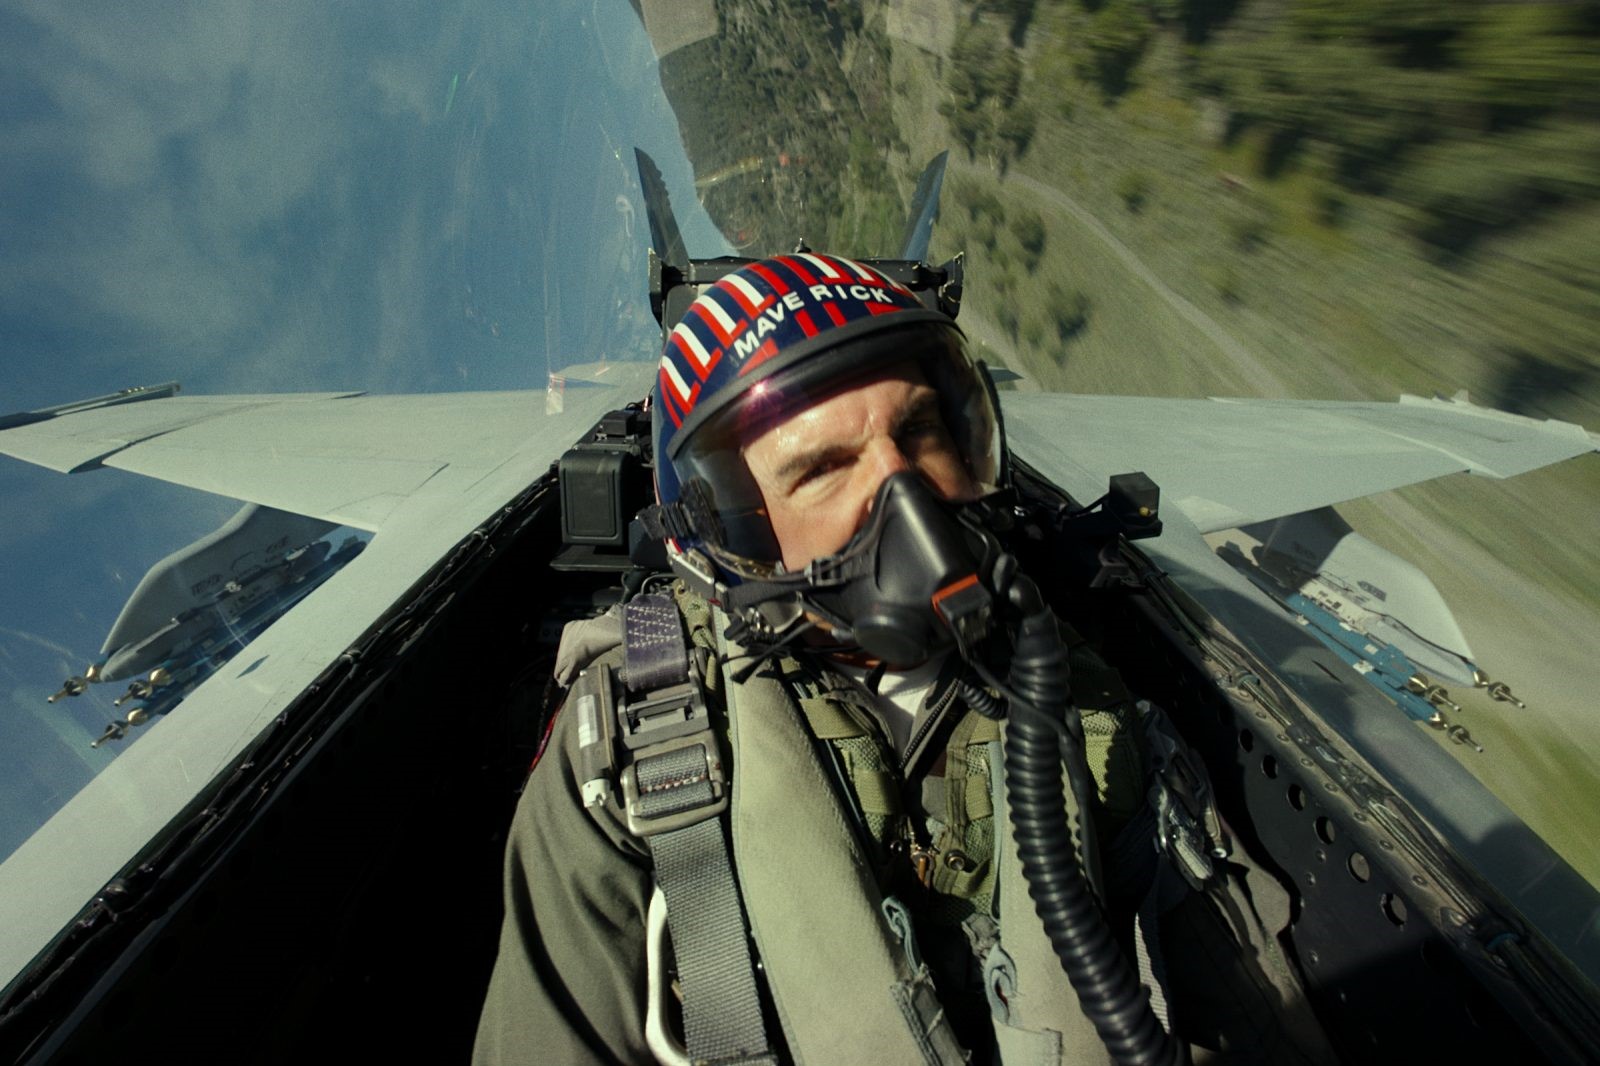 Does Tom Cruise fly planes in real life?